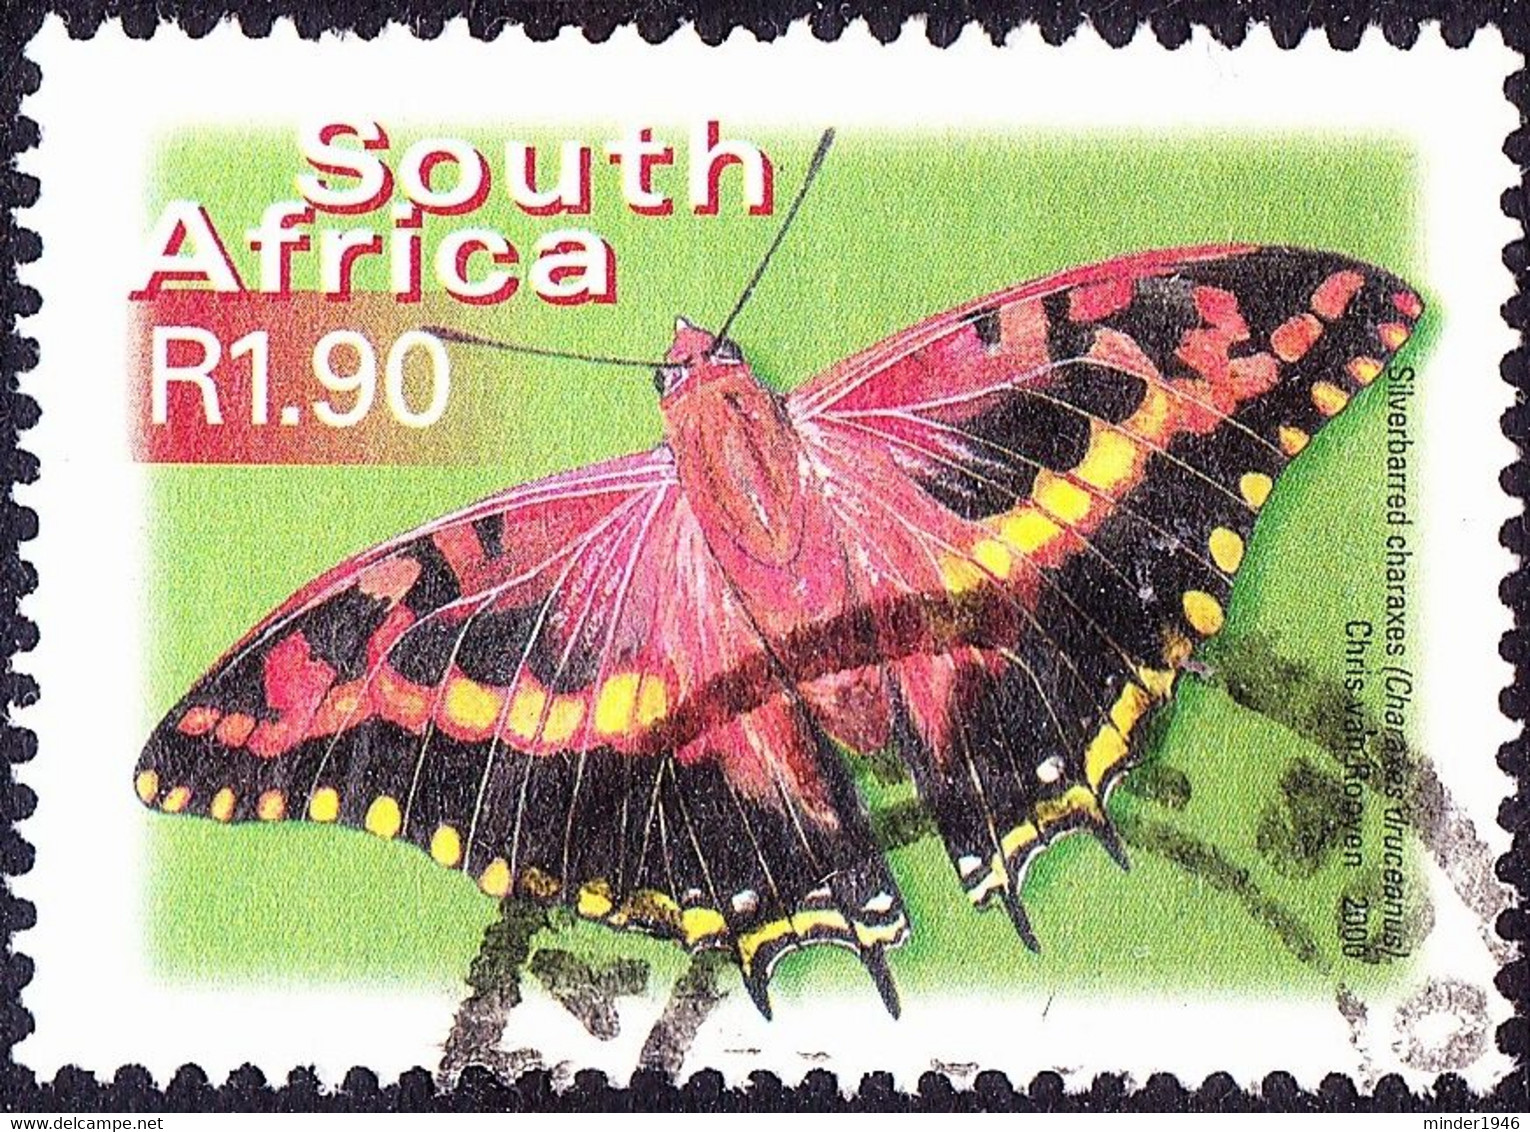 SOUTH AFRICA  2000 1.90R Multicoloured, Fauna & Flora - Butterflies SG1224 FU - Used Stamps